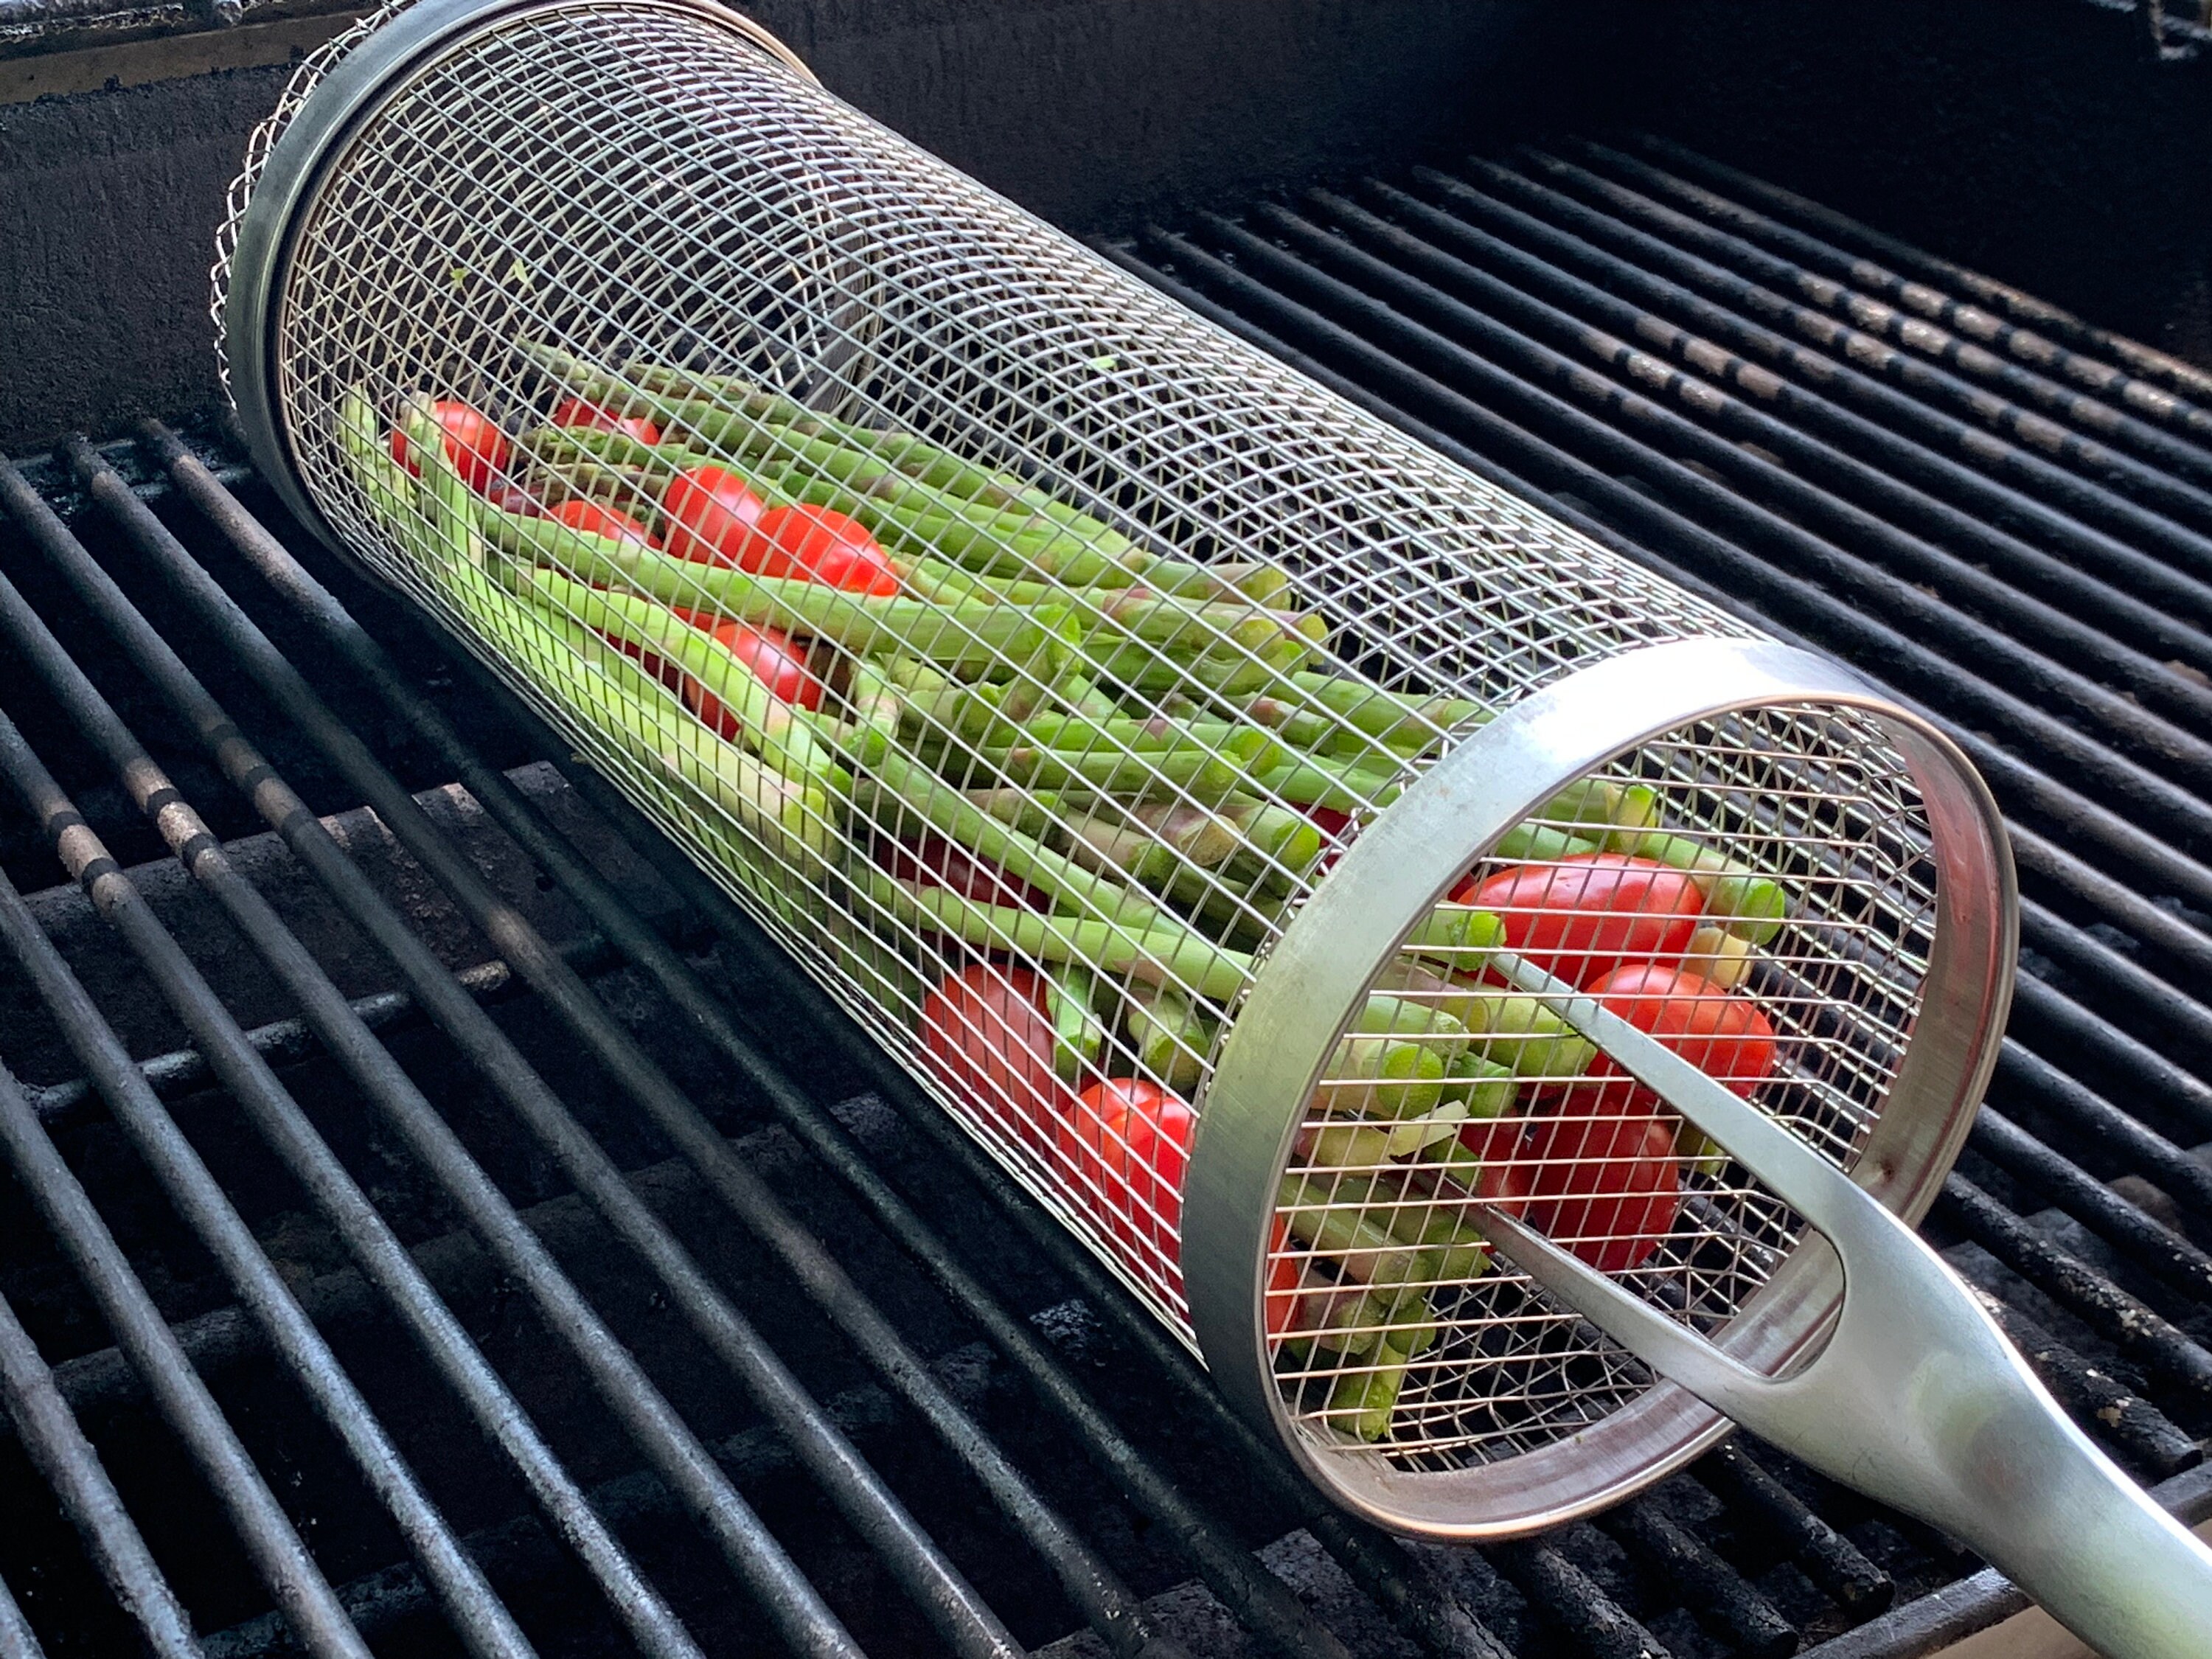 Grill Xpert Grill Topper for Outdoor Grill (4 Pack) - Disposable Grill Topper - Grill Mesh - 14x11 inch Meat and Vegtable Disposable Grill Grates, Sil